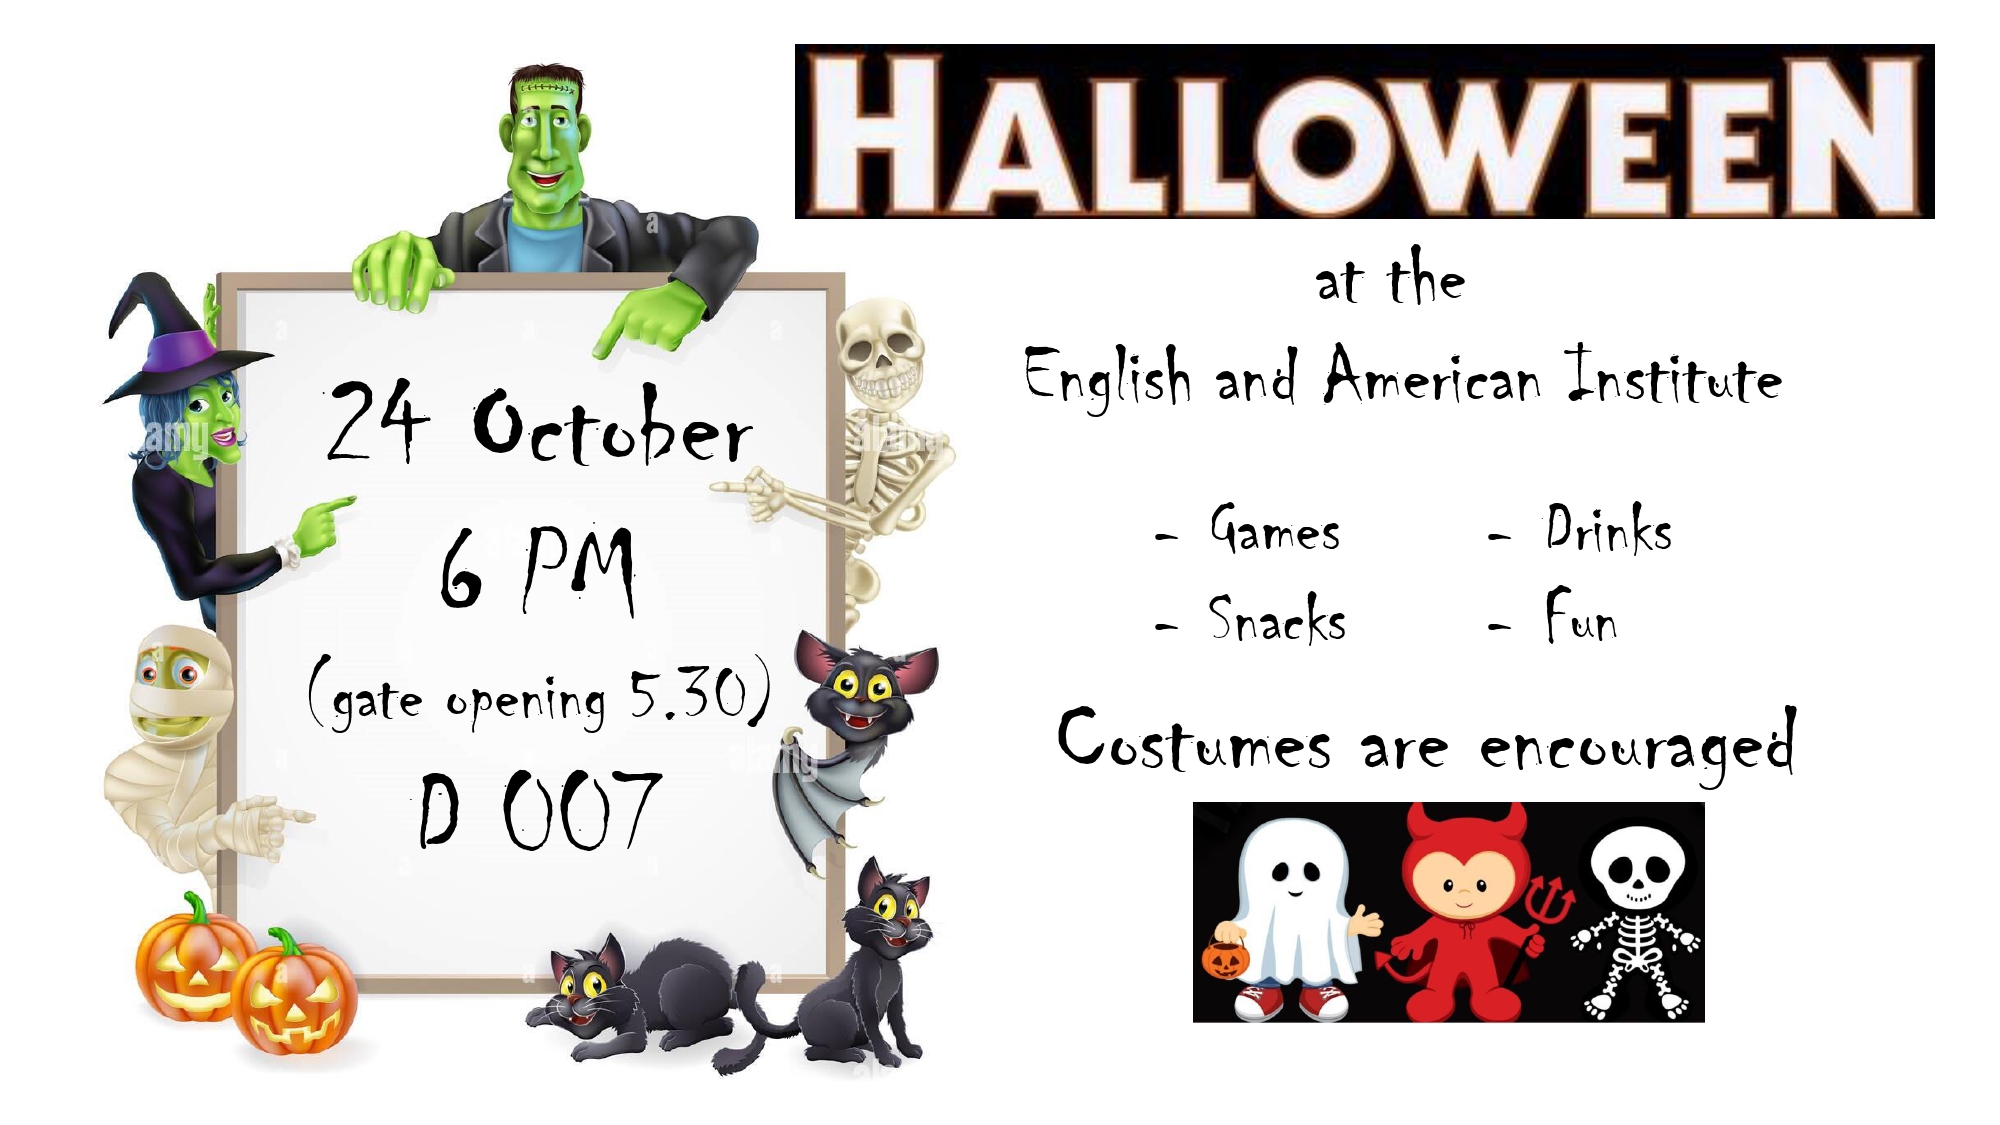 Halloween at the Institute of English and American Studies